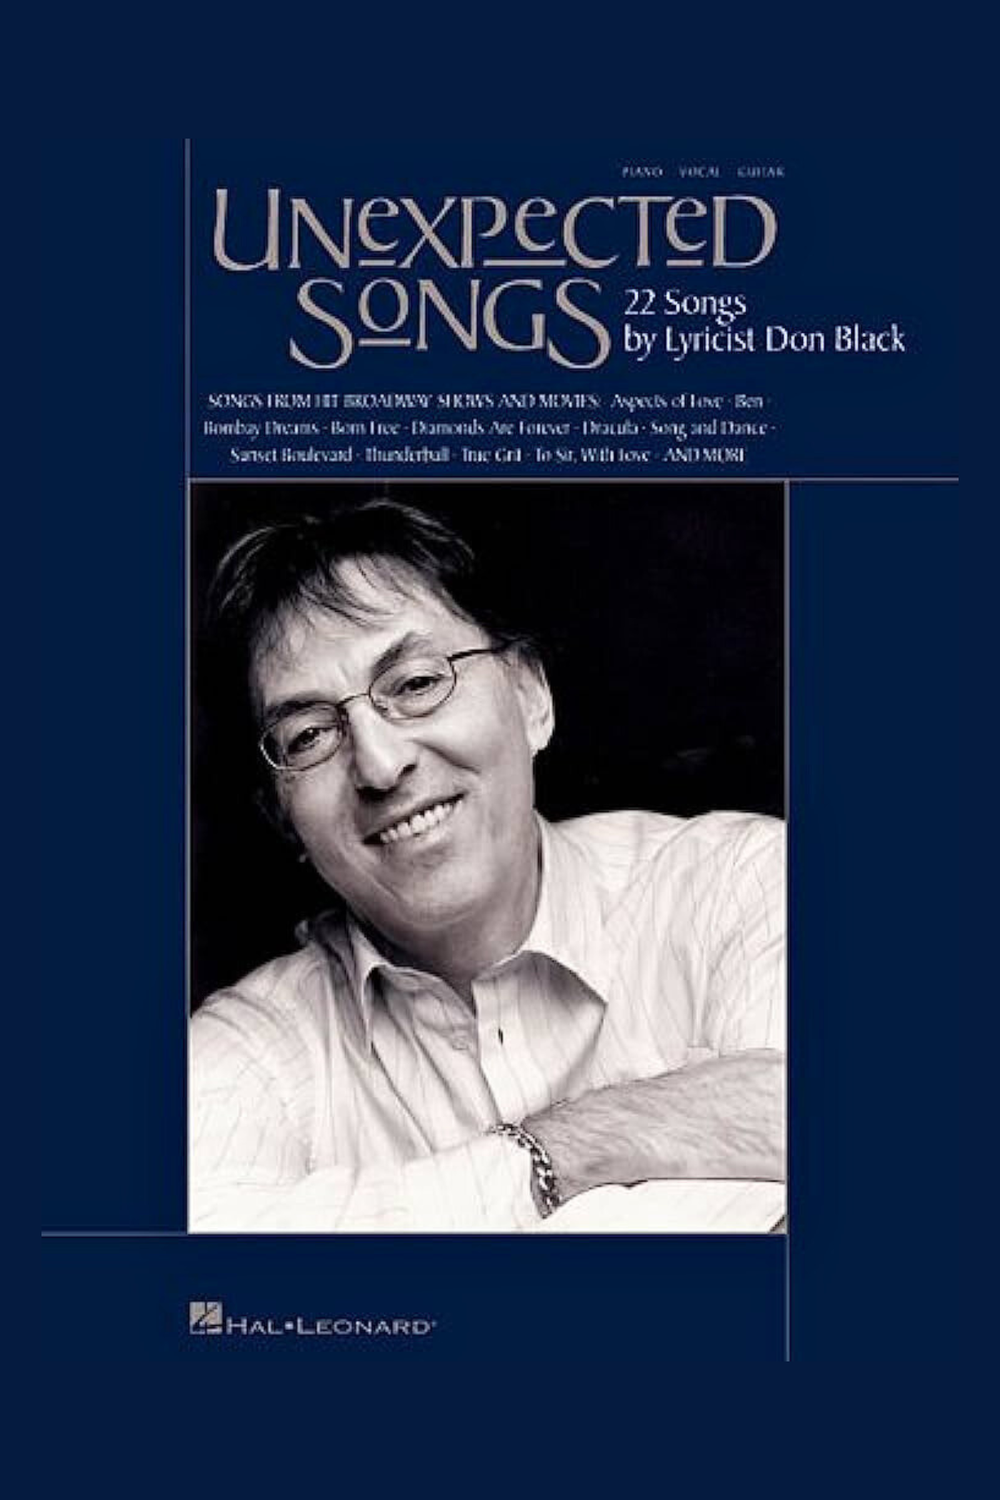 Don Black, Unexpected Songs Poster.png